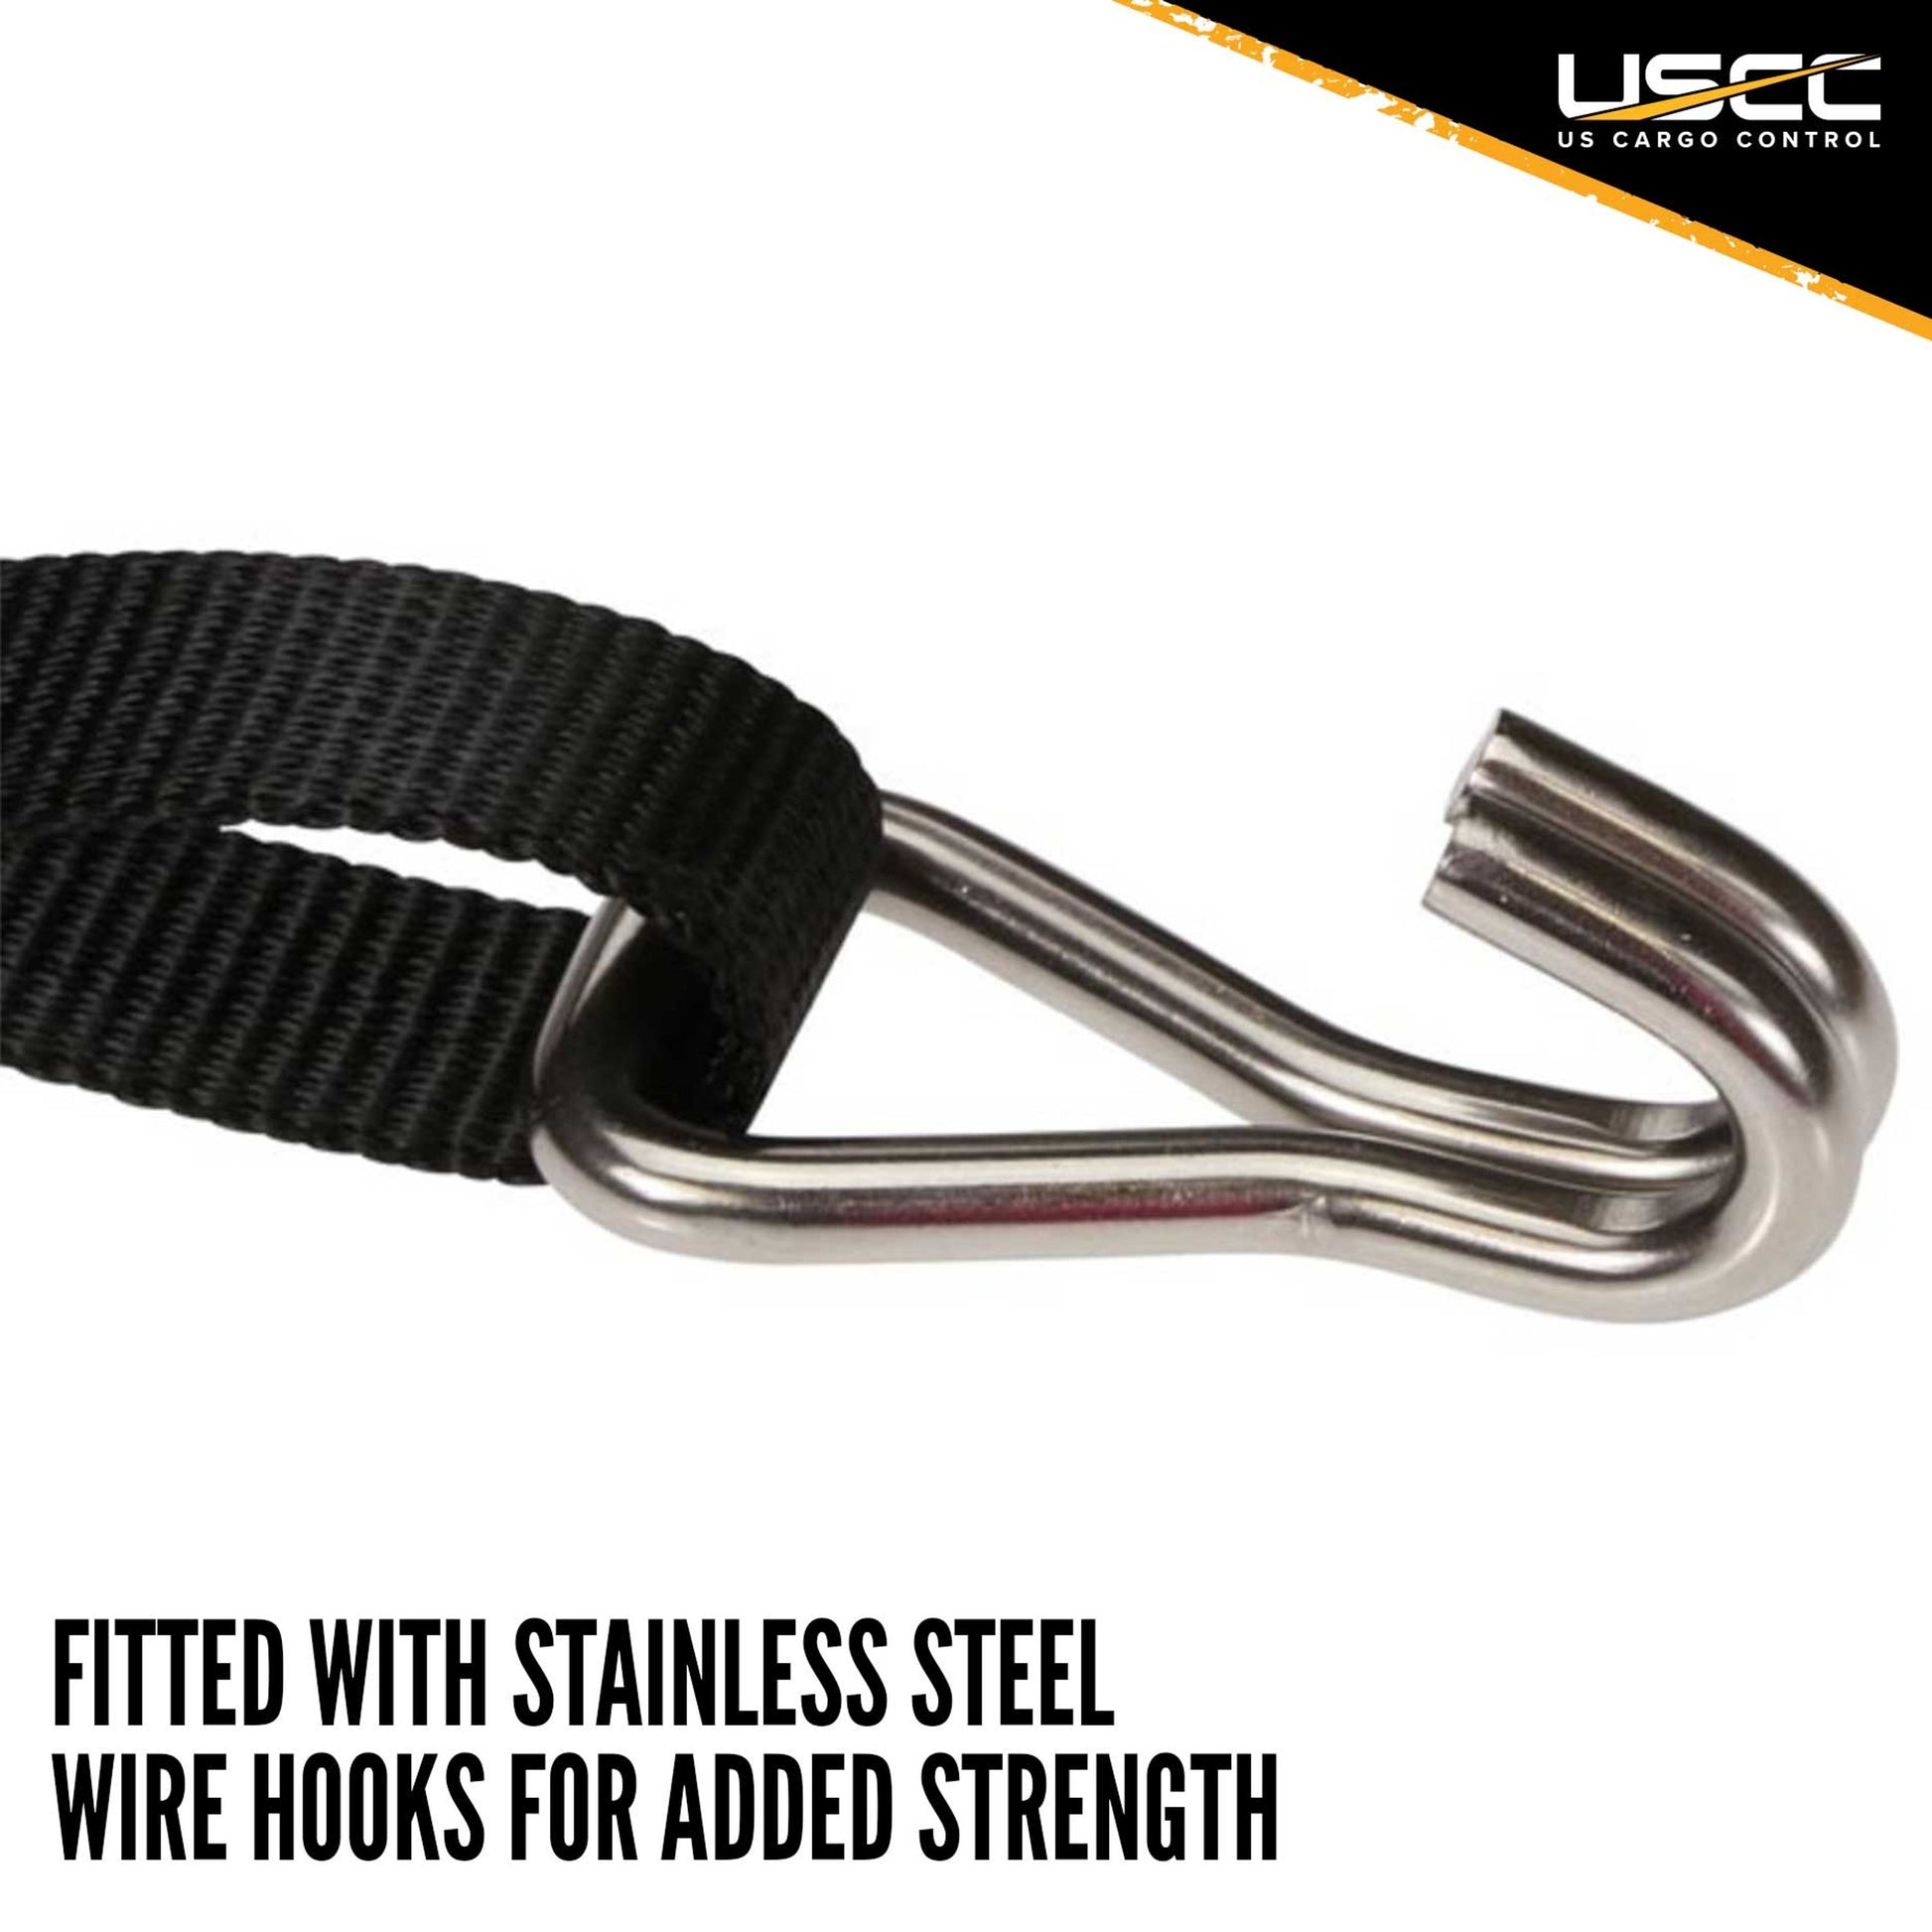 1 Long Wire Hook - STAINLESS STEEL